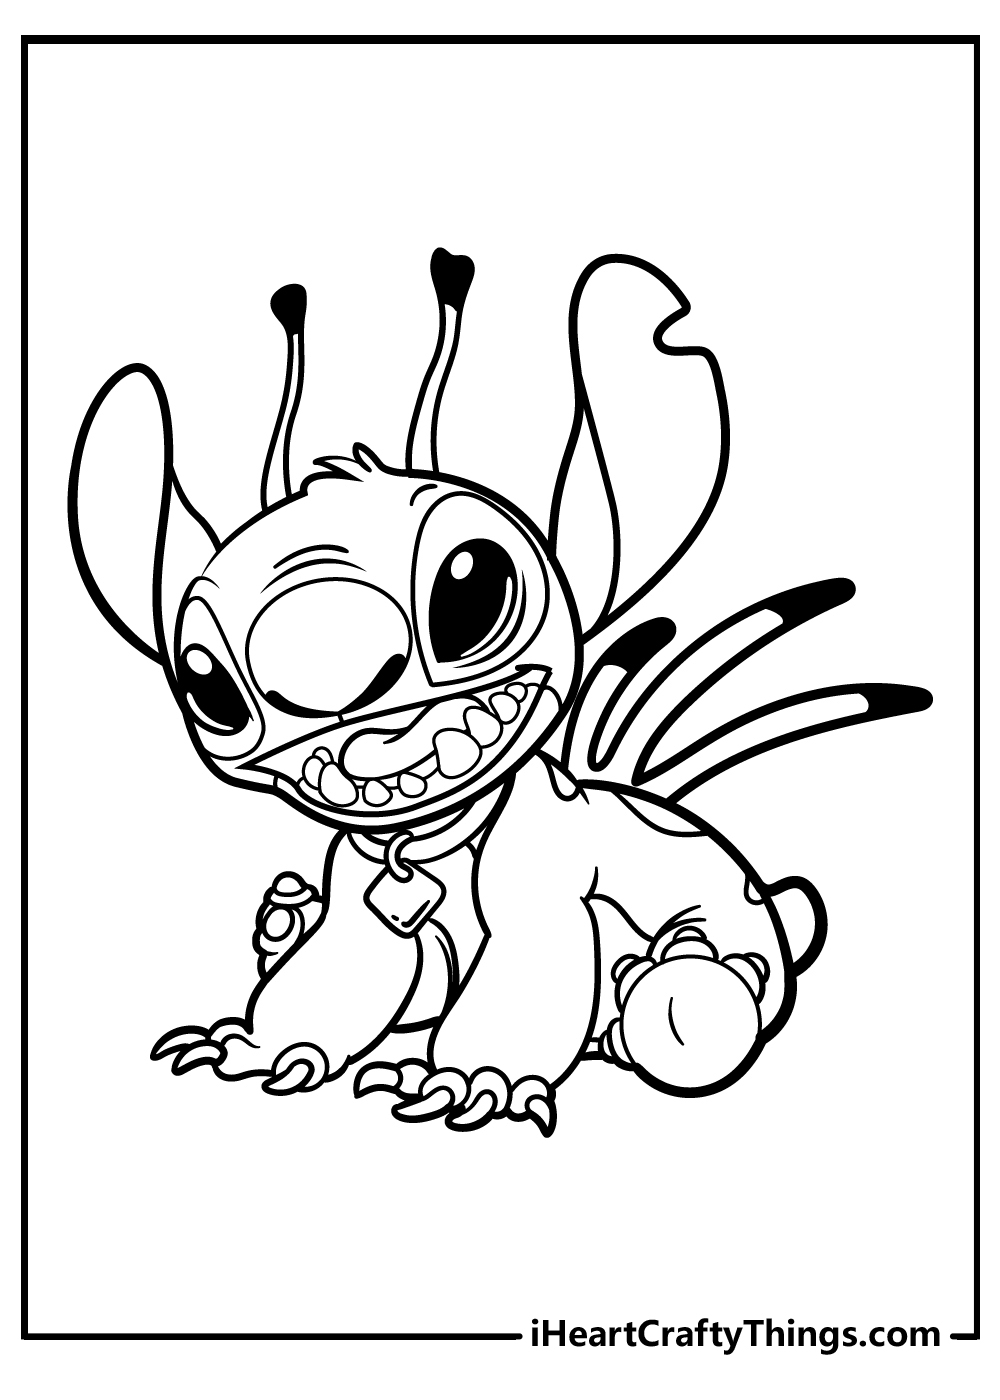 8 Cute Stitch Colouring Pages